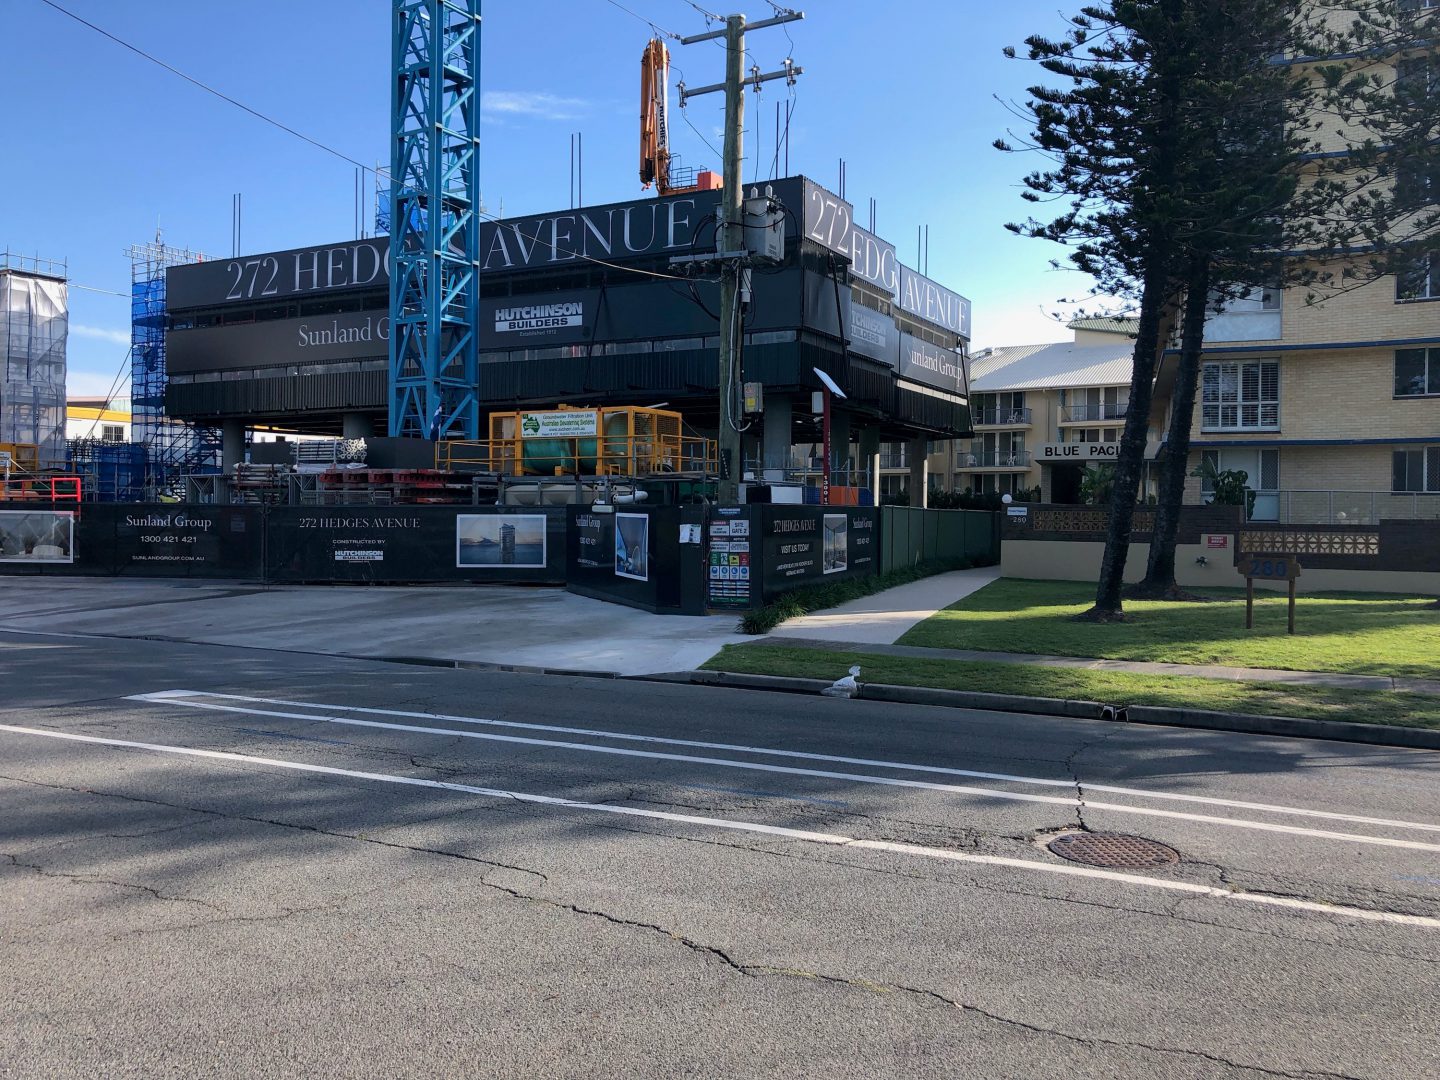 272 Hedges Avenue Construction Update April 2020 (image supplied by the developer)